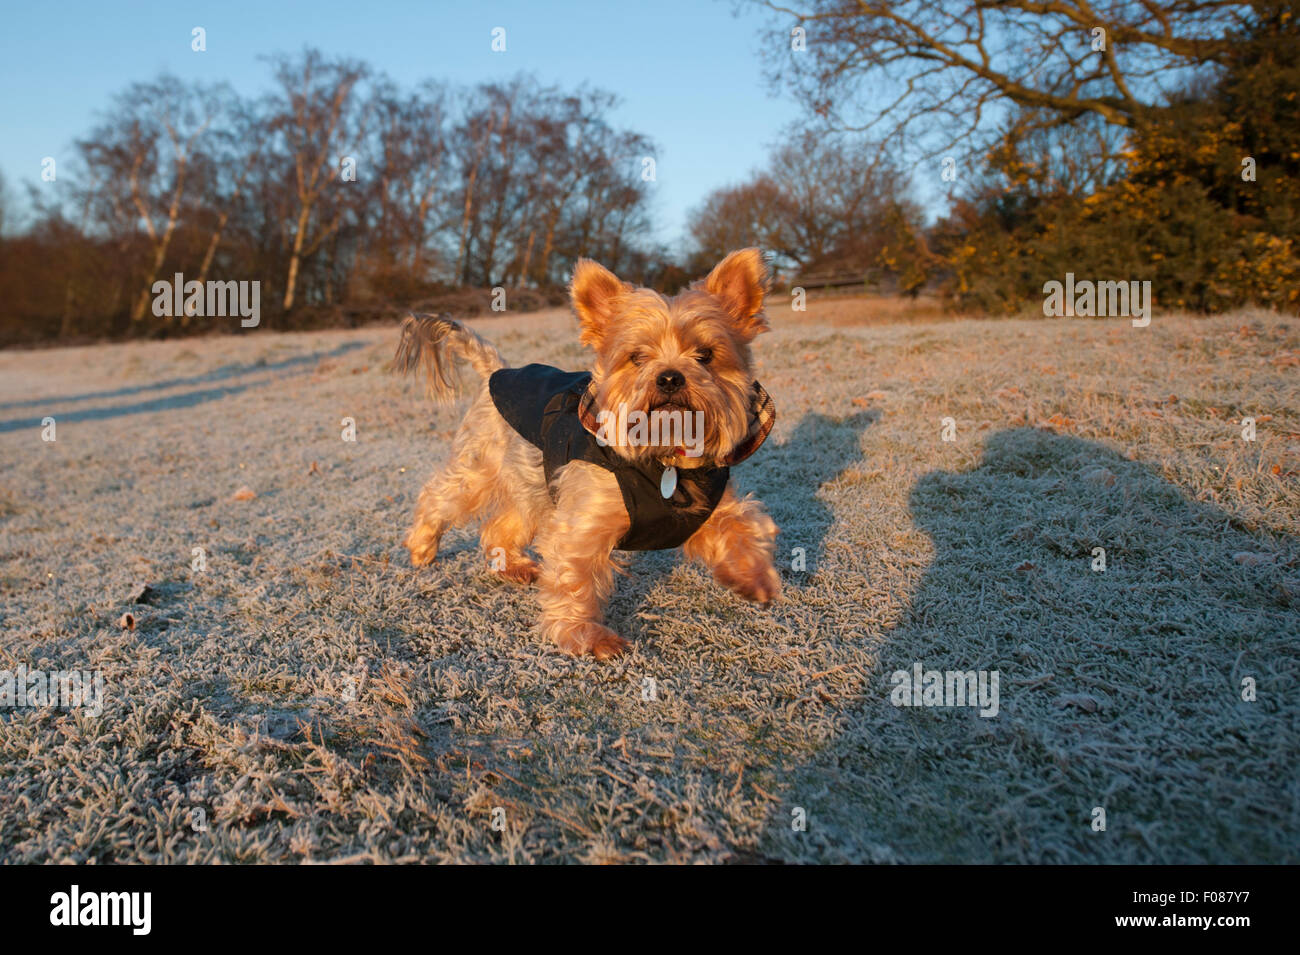 Small dog wearing a coat in winter sunlight looking at camera on frosty, icy grass in country park. Stock Photo